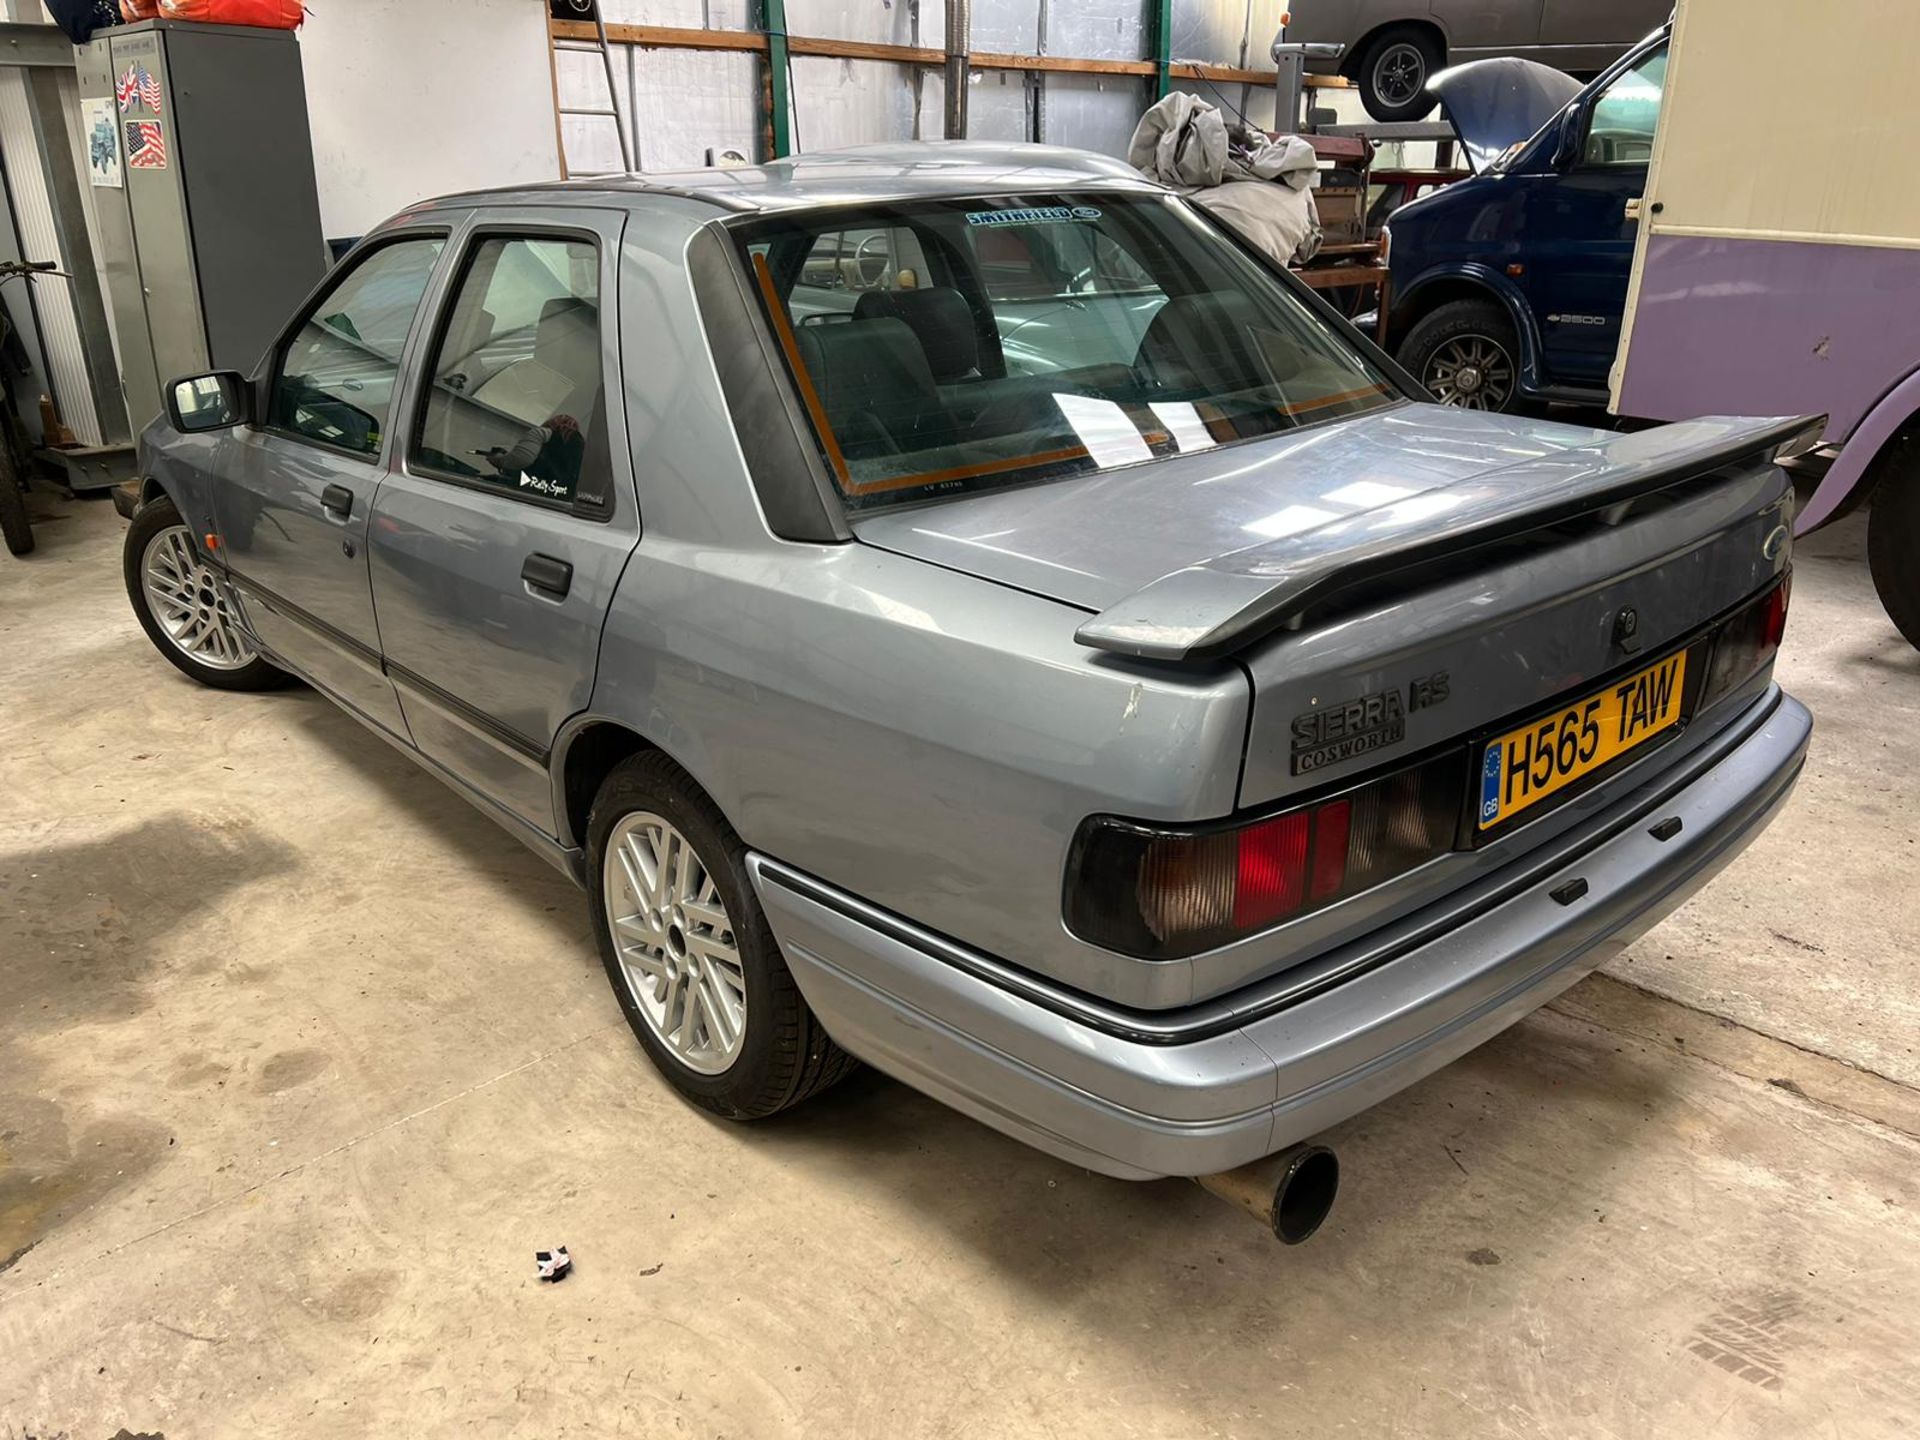 Ford Sierra Sapphire Cosworth 4x4 RS 1990 - Image 4 of 15